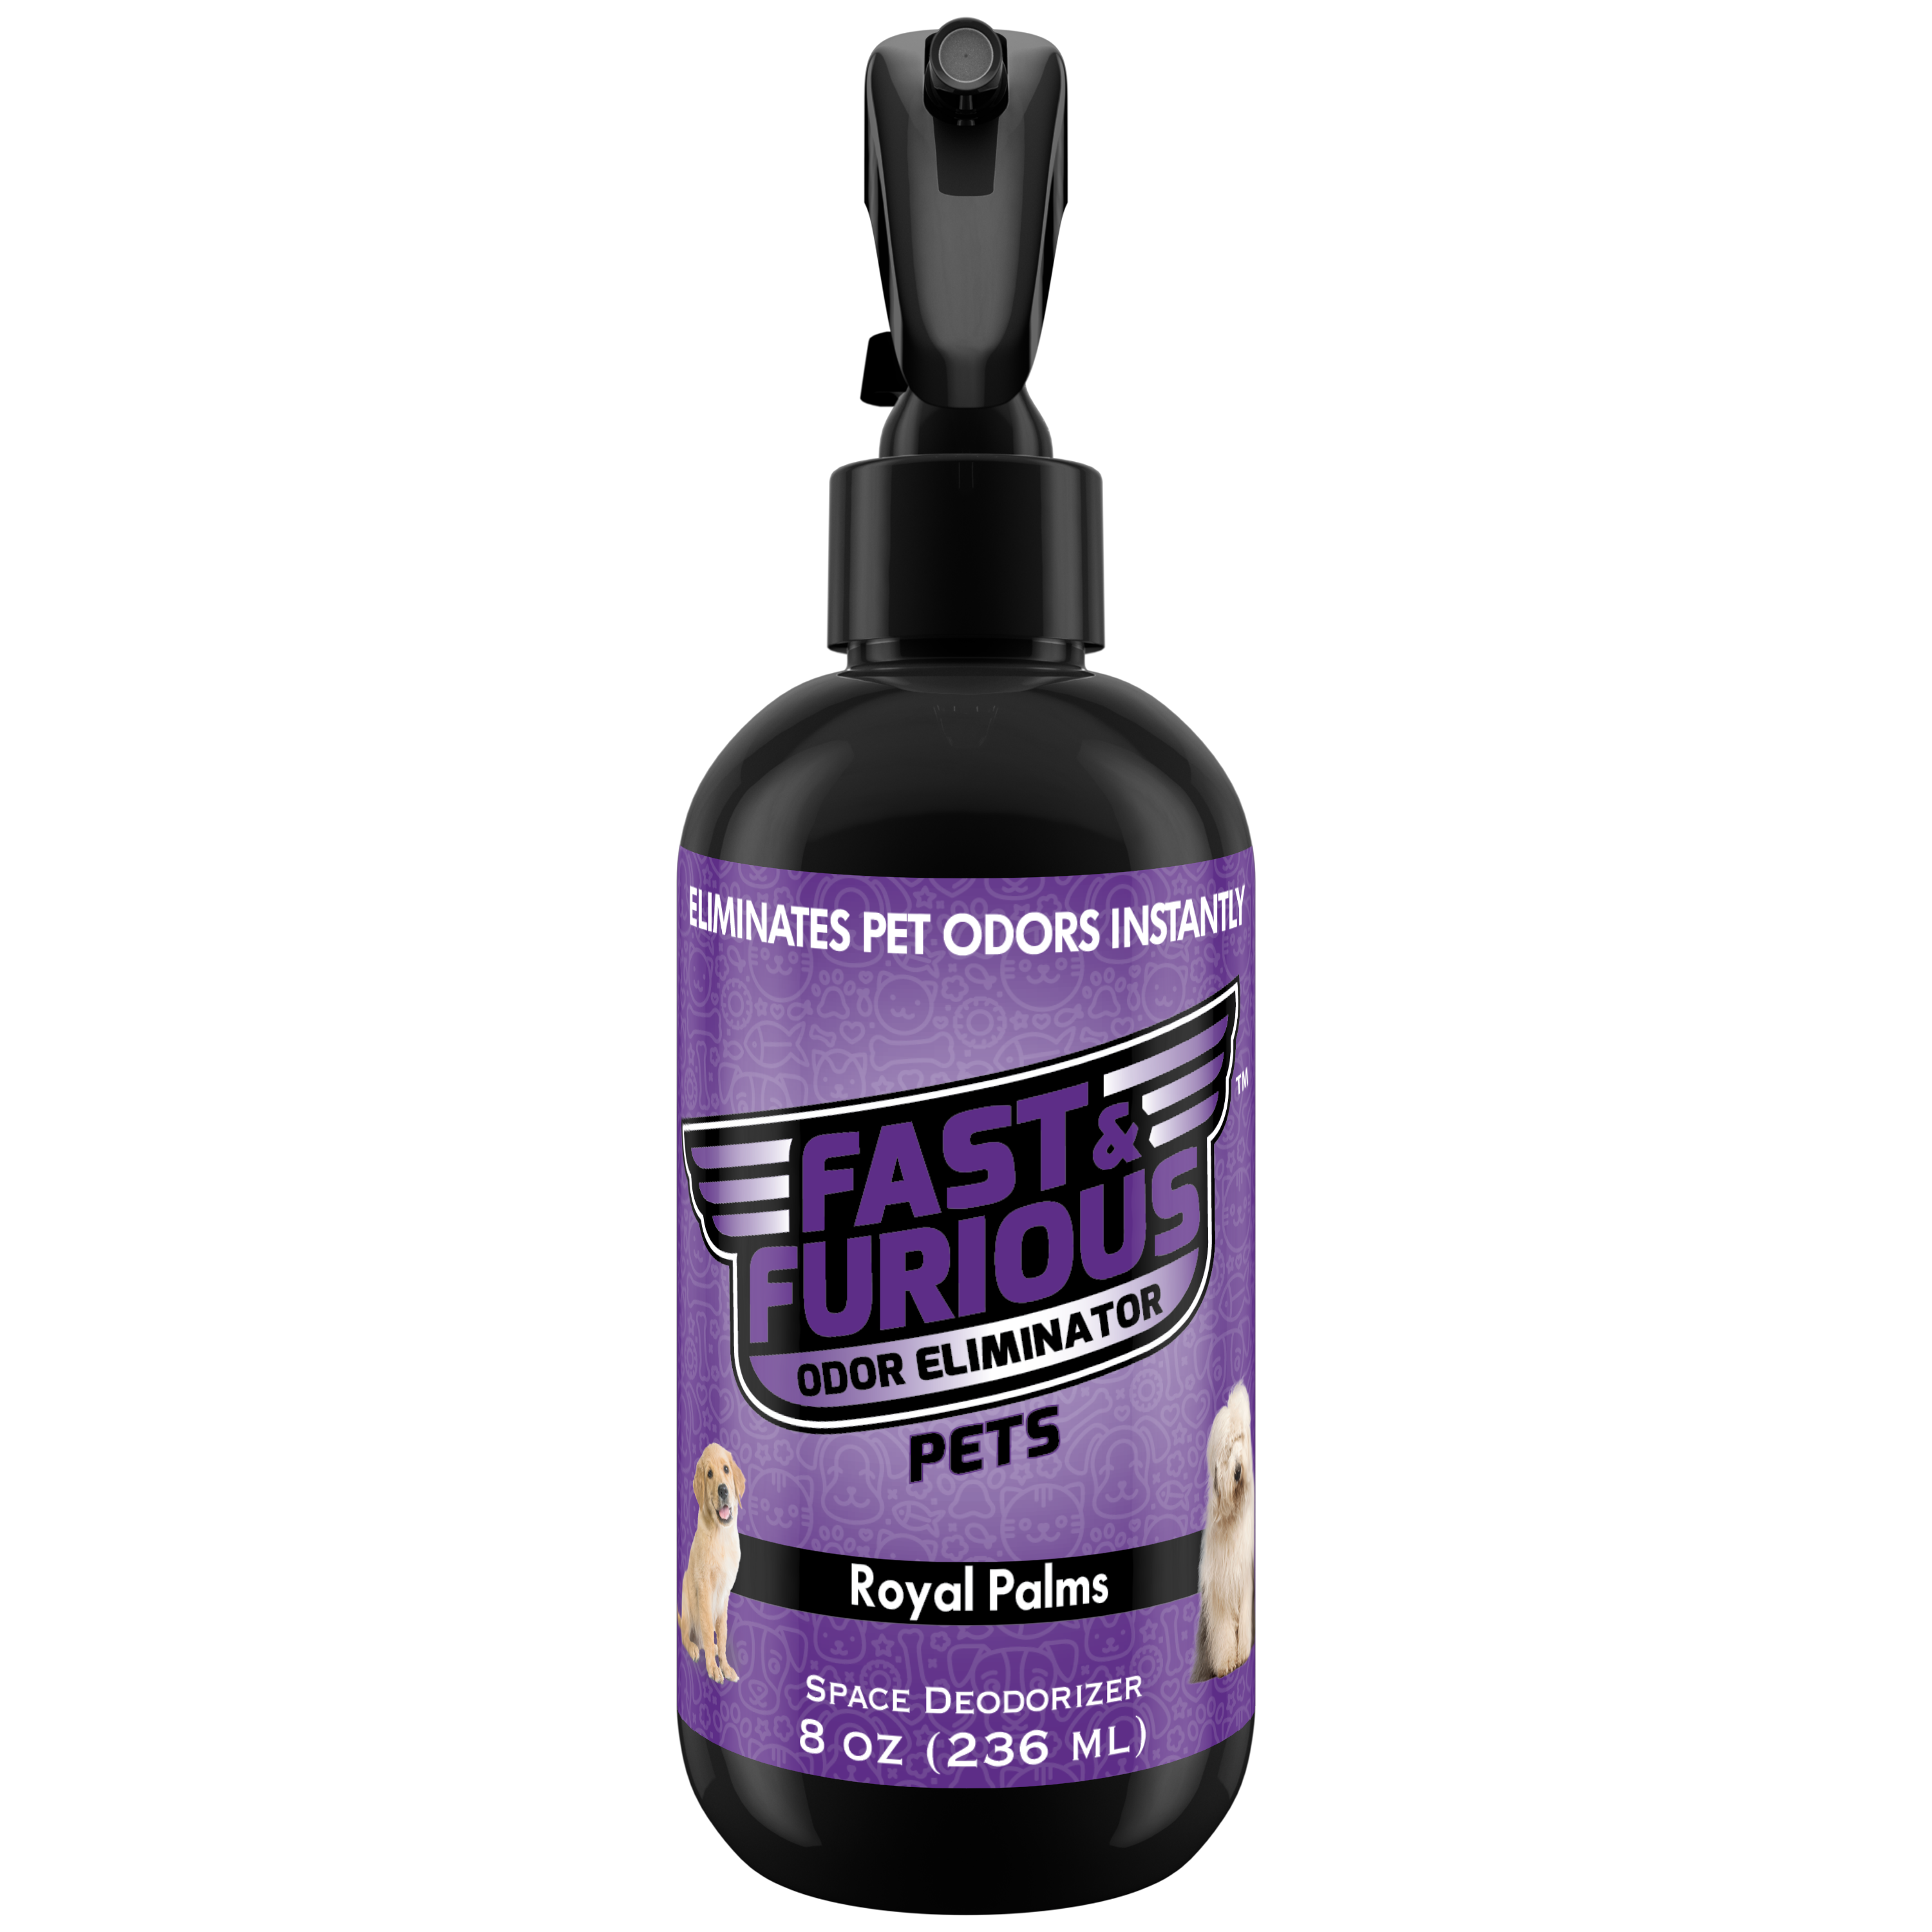 Fast and Furious Pets Odor Eliminator - Royal Palms Scent